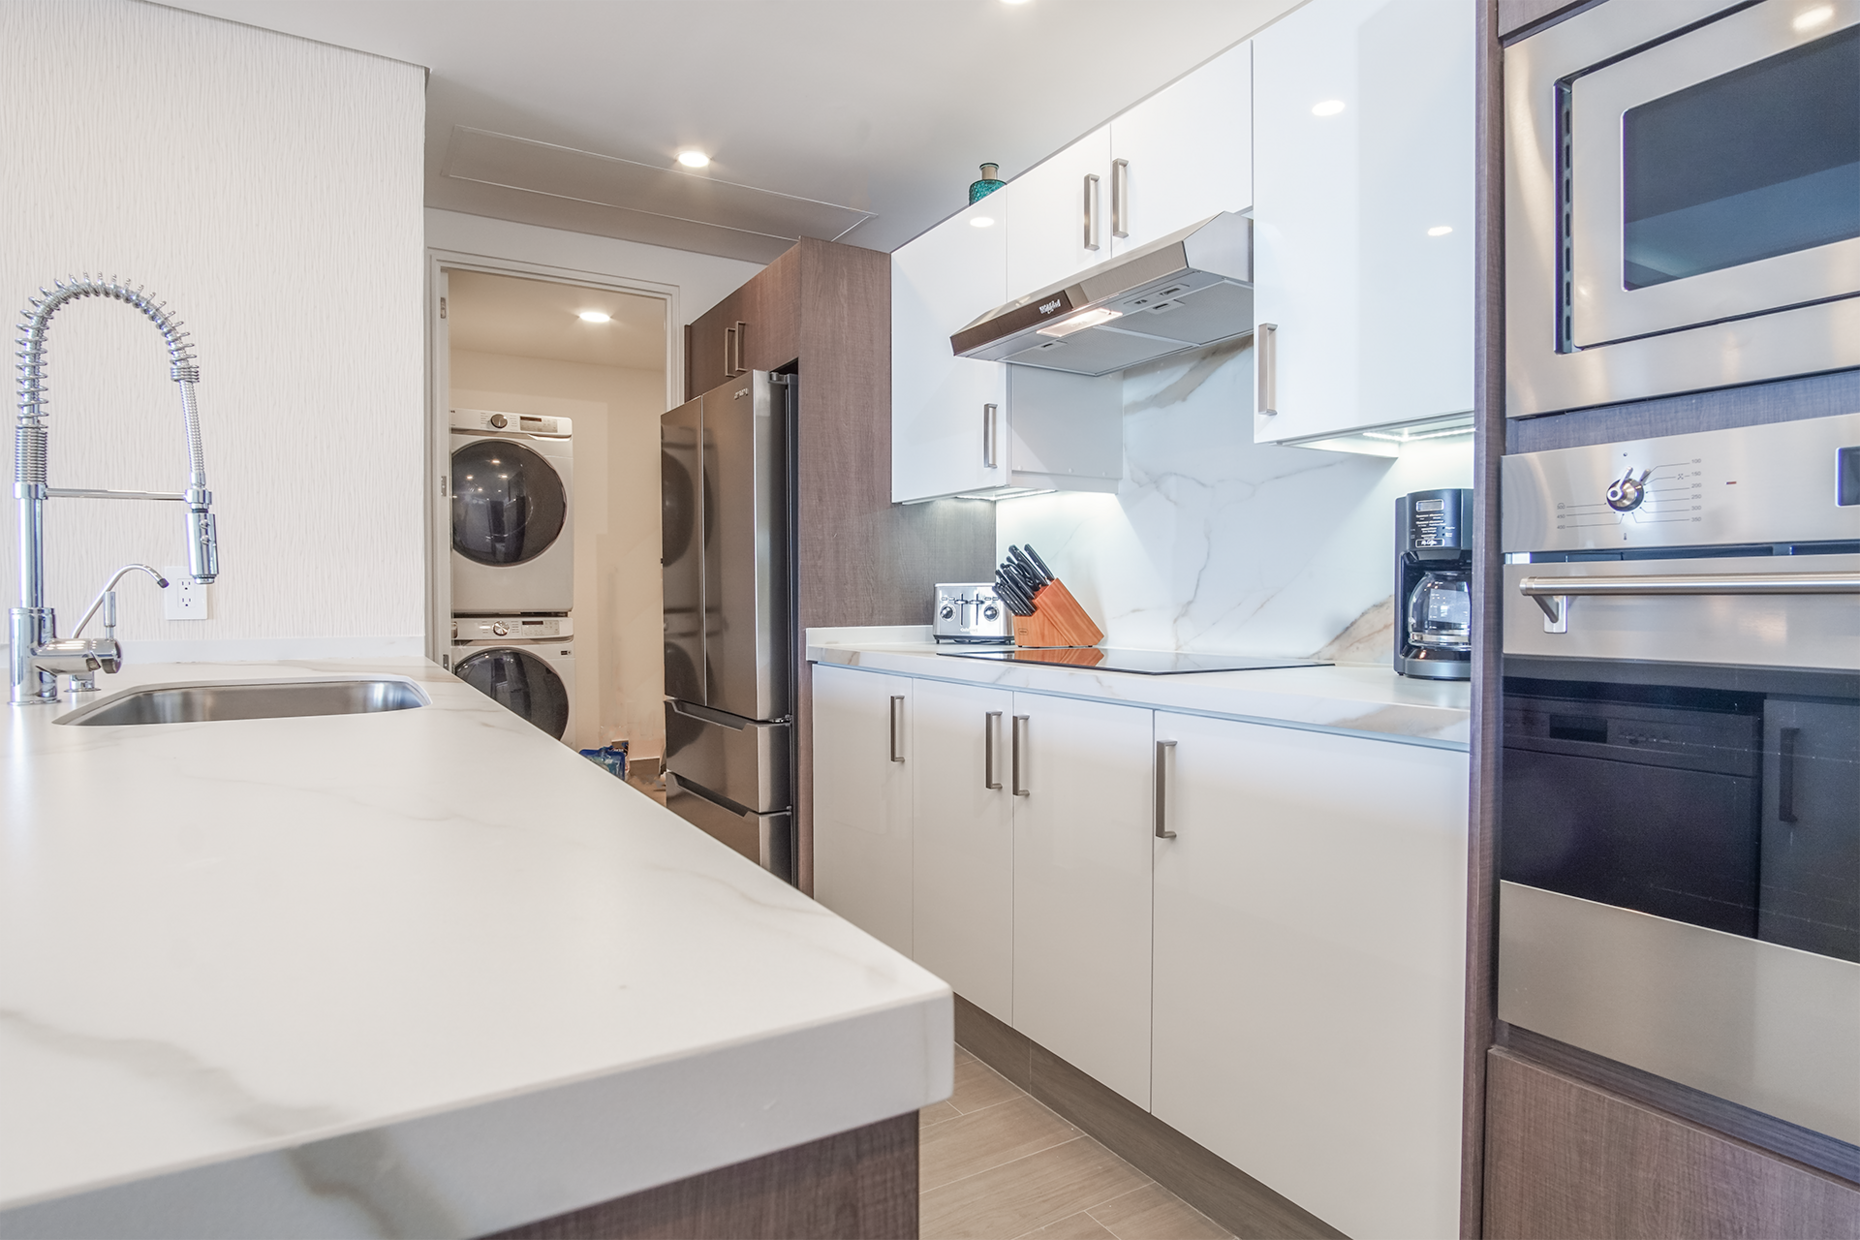 The kitchen attaches to a utility room with its own washer and dryer